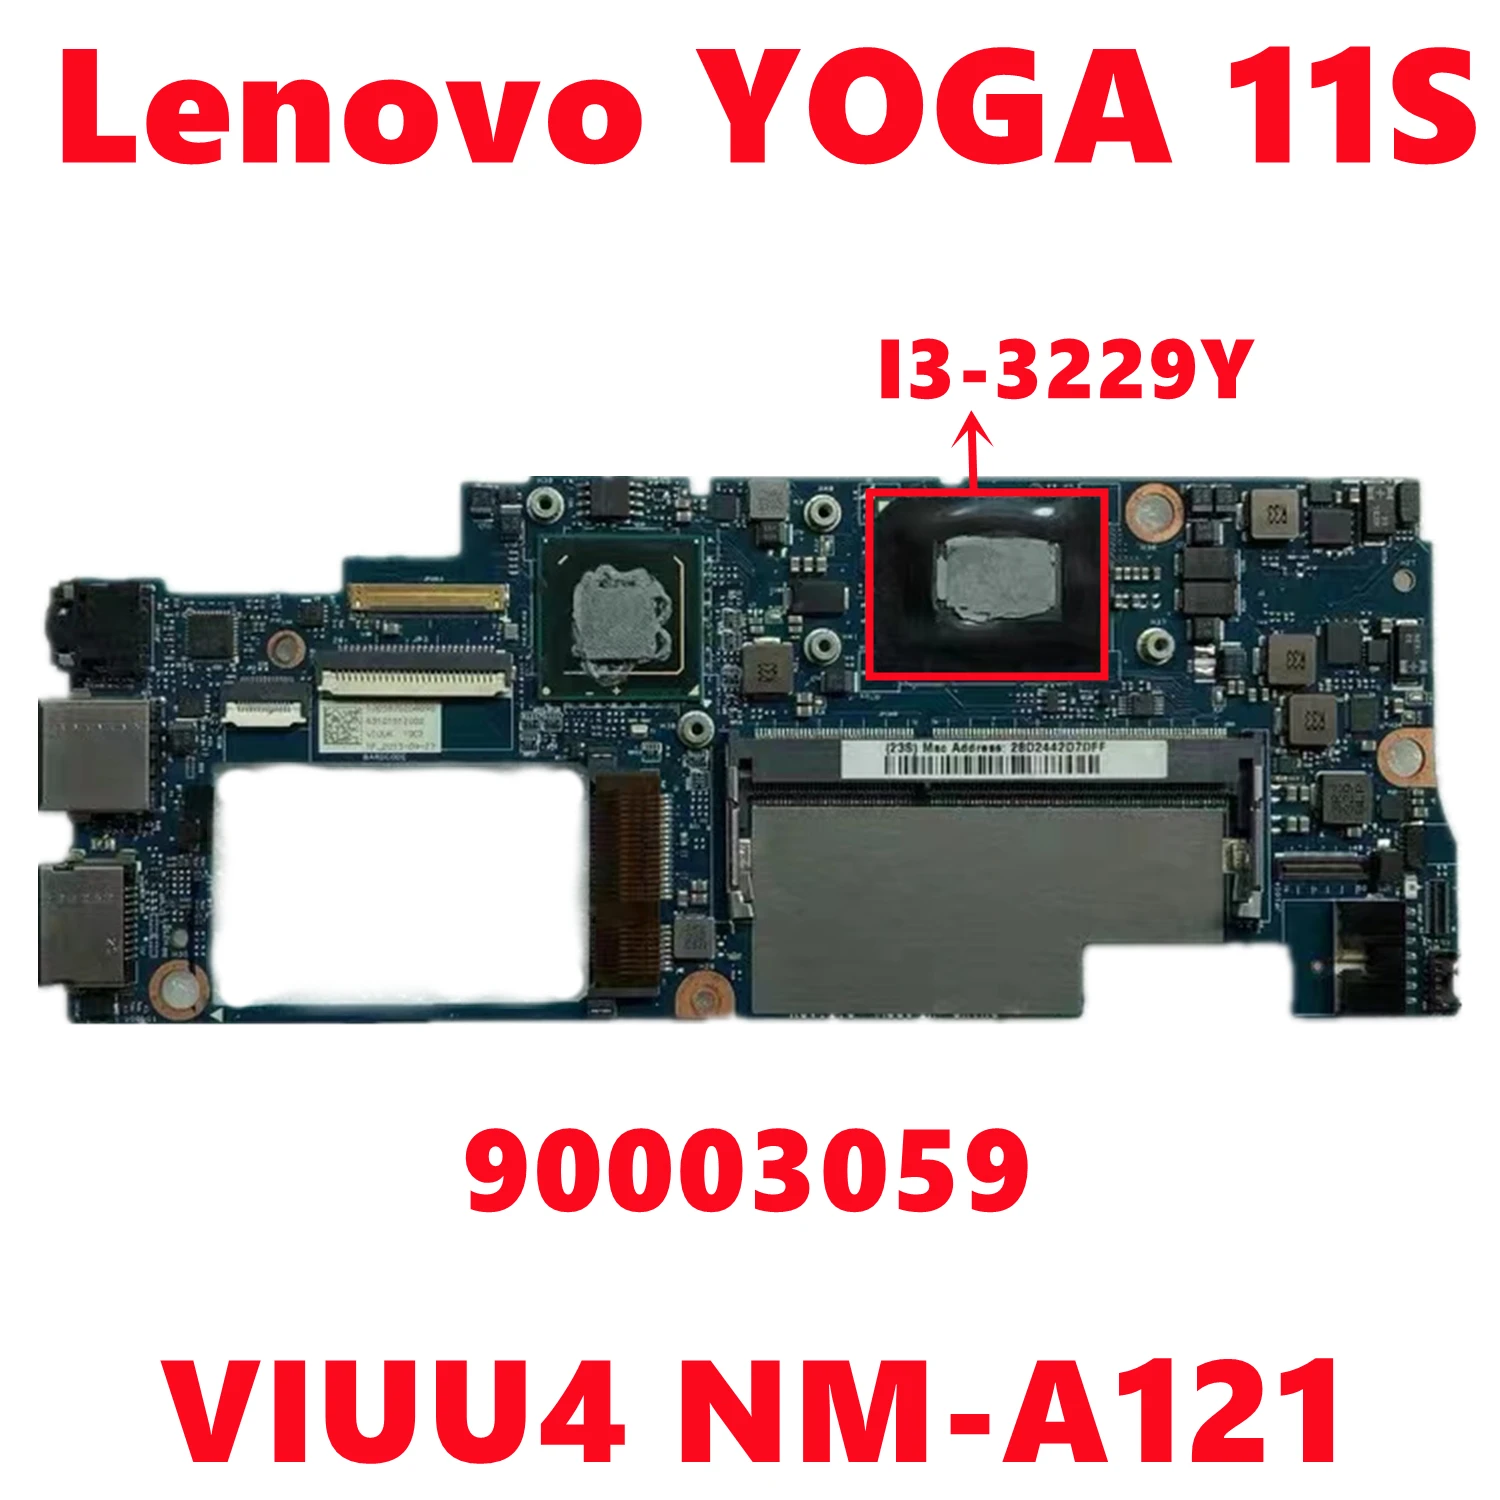 

FRU:90003059 Mainboard For Lenovo YOGA 11S Laptop Motherboard VIUU4 NM-A121 With i3-3229Y CPU DDR3 100% Test working